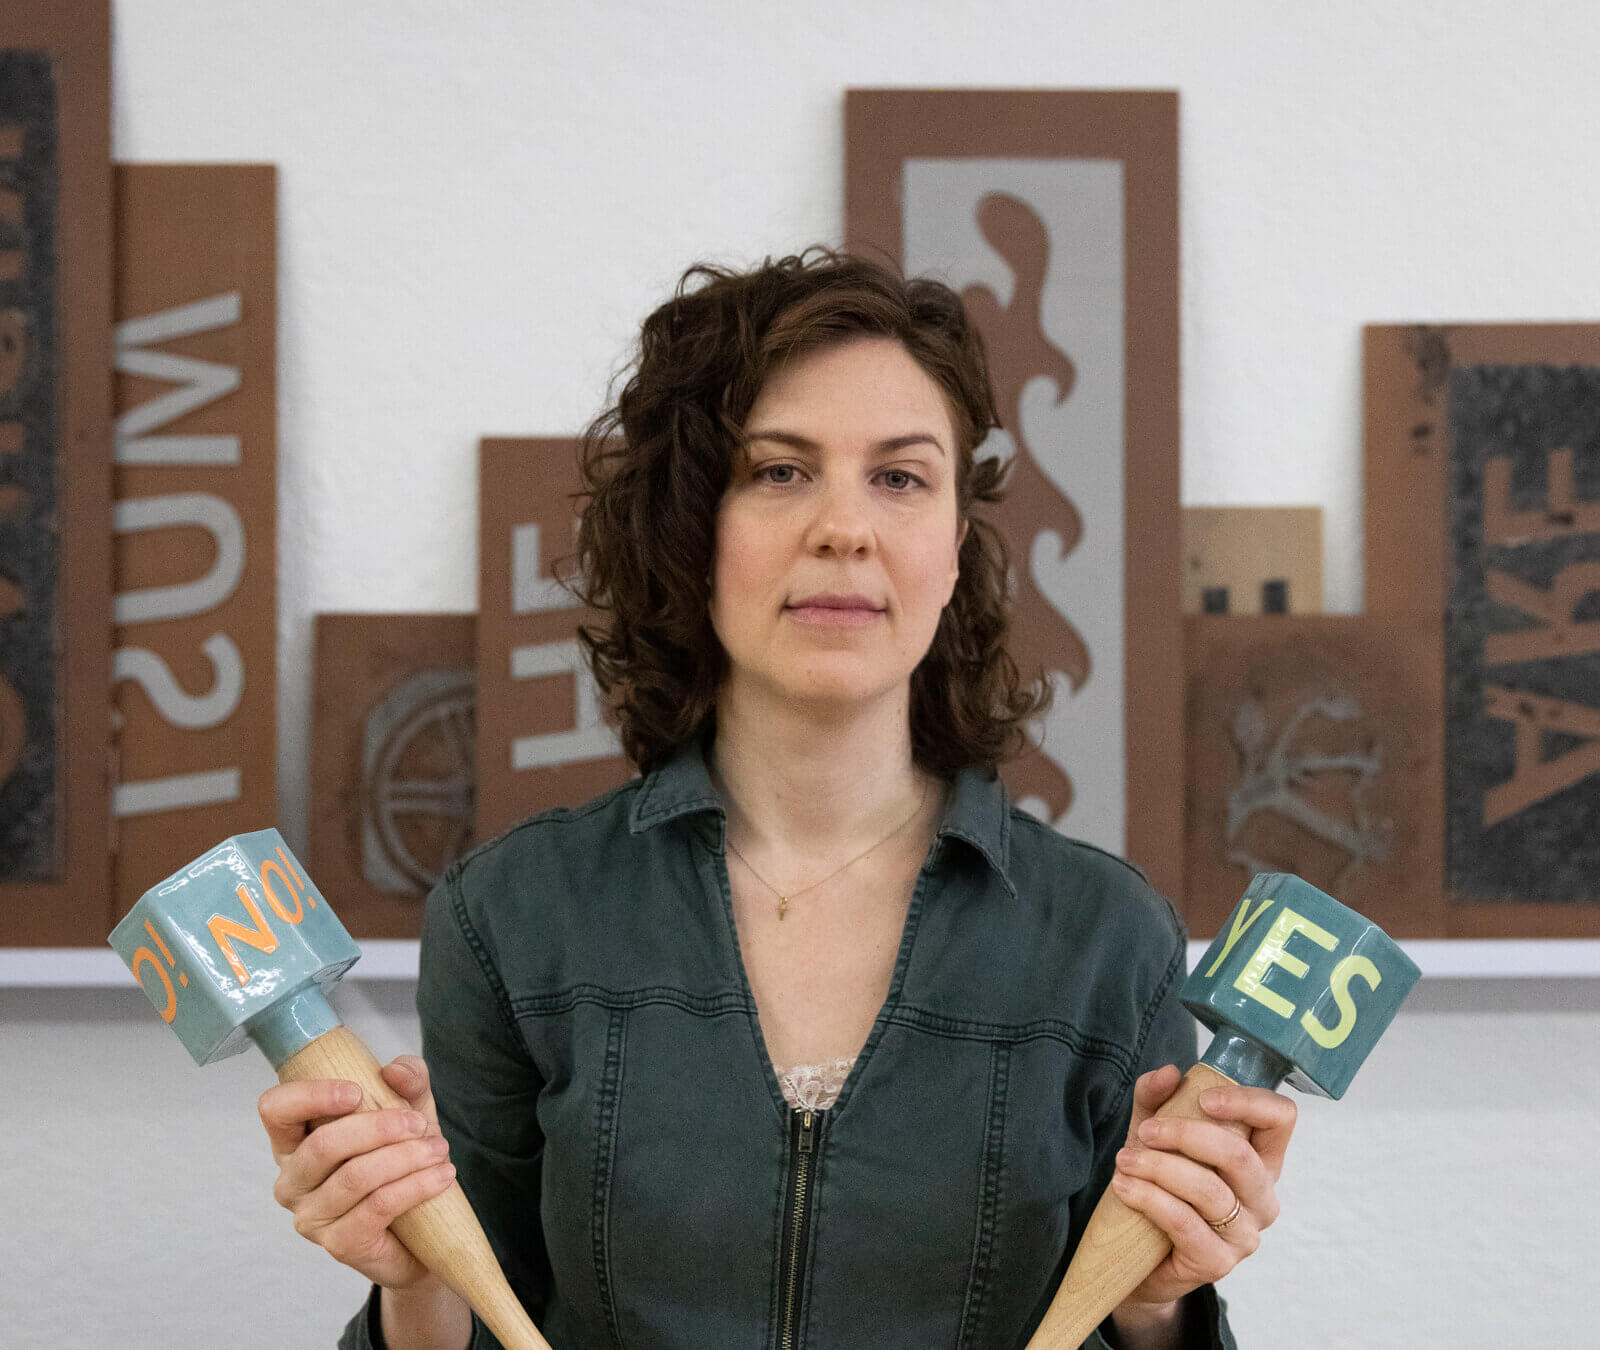 Raised in a religiously observant household, Mann draws upon Jewish themes of liberation and resilience even as she immerses herself in the modern movements she’s part of — including Occupy, climate justice and abortion rights. 
